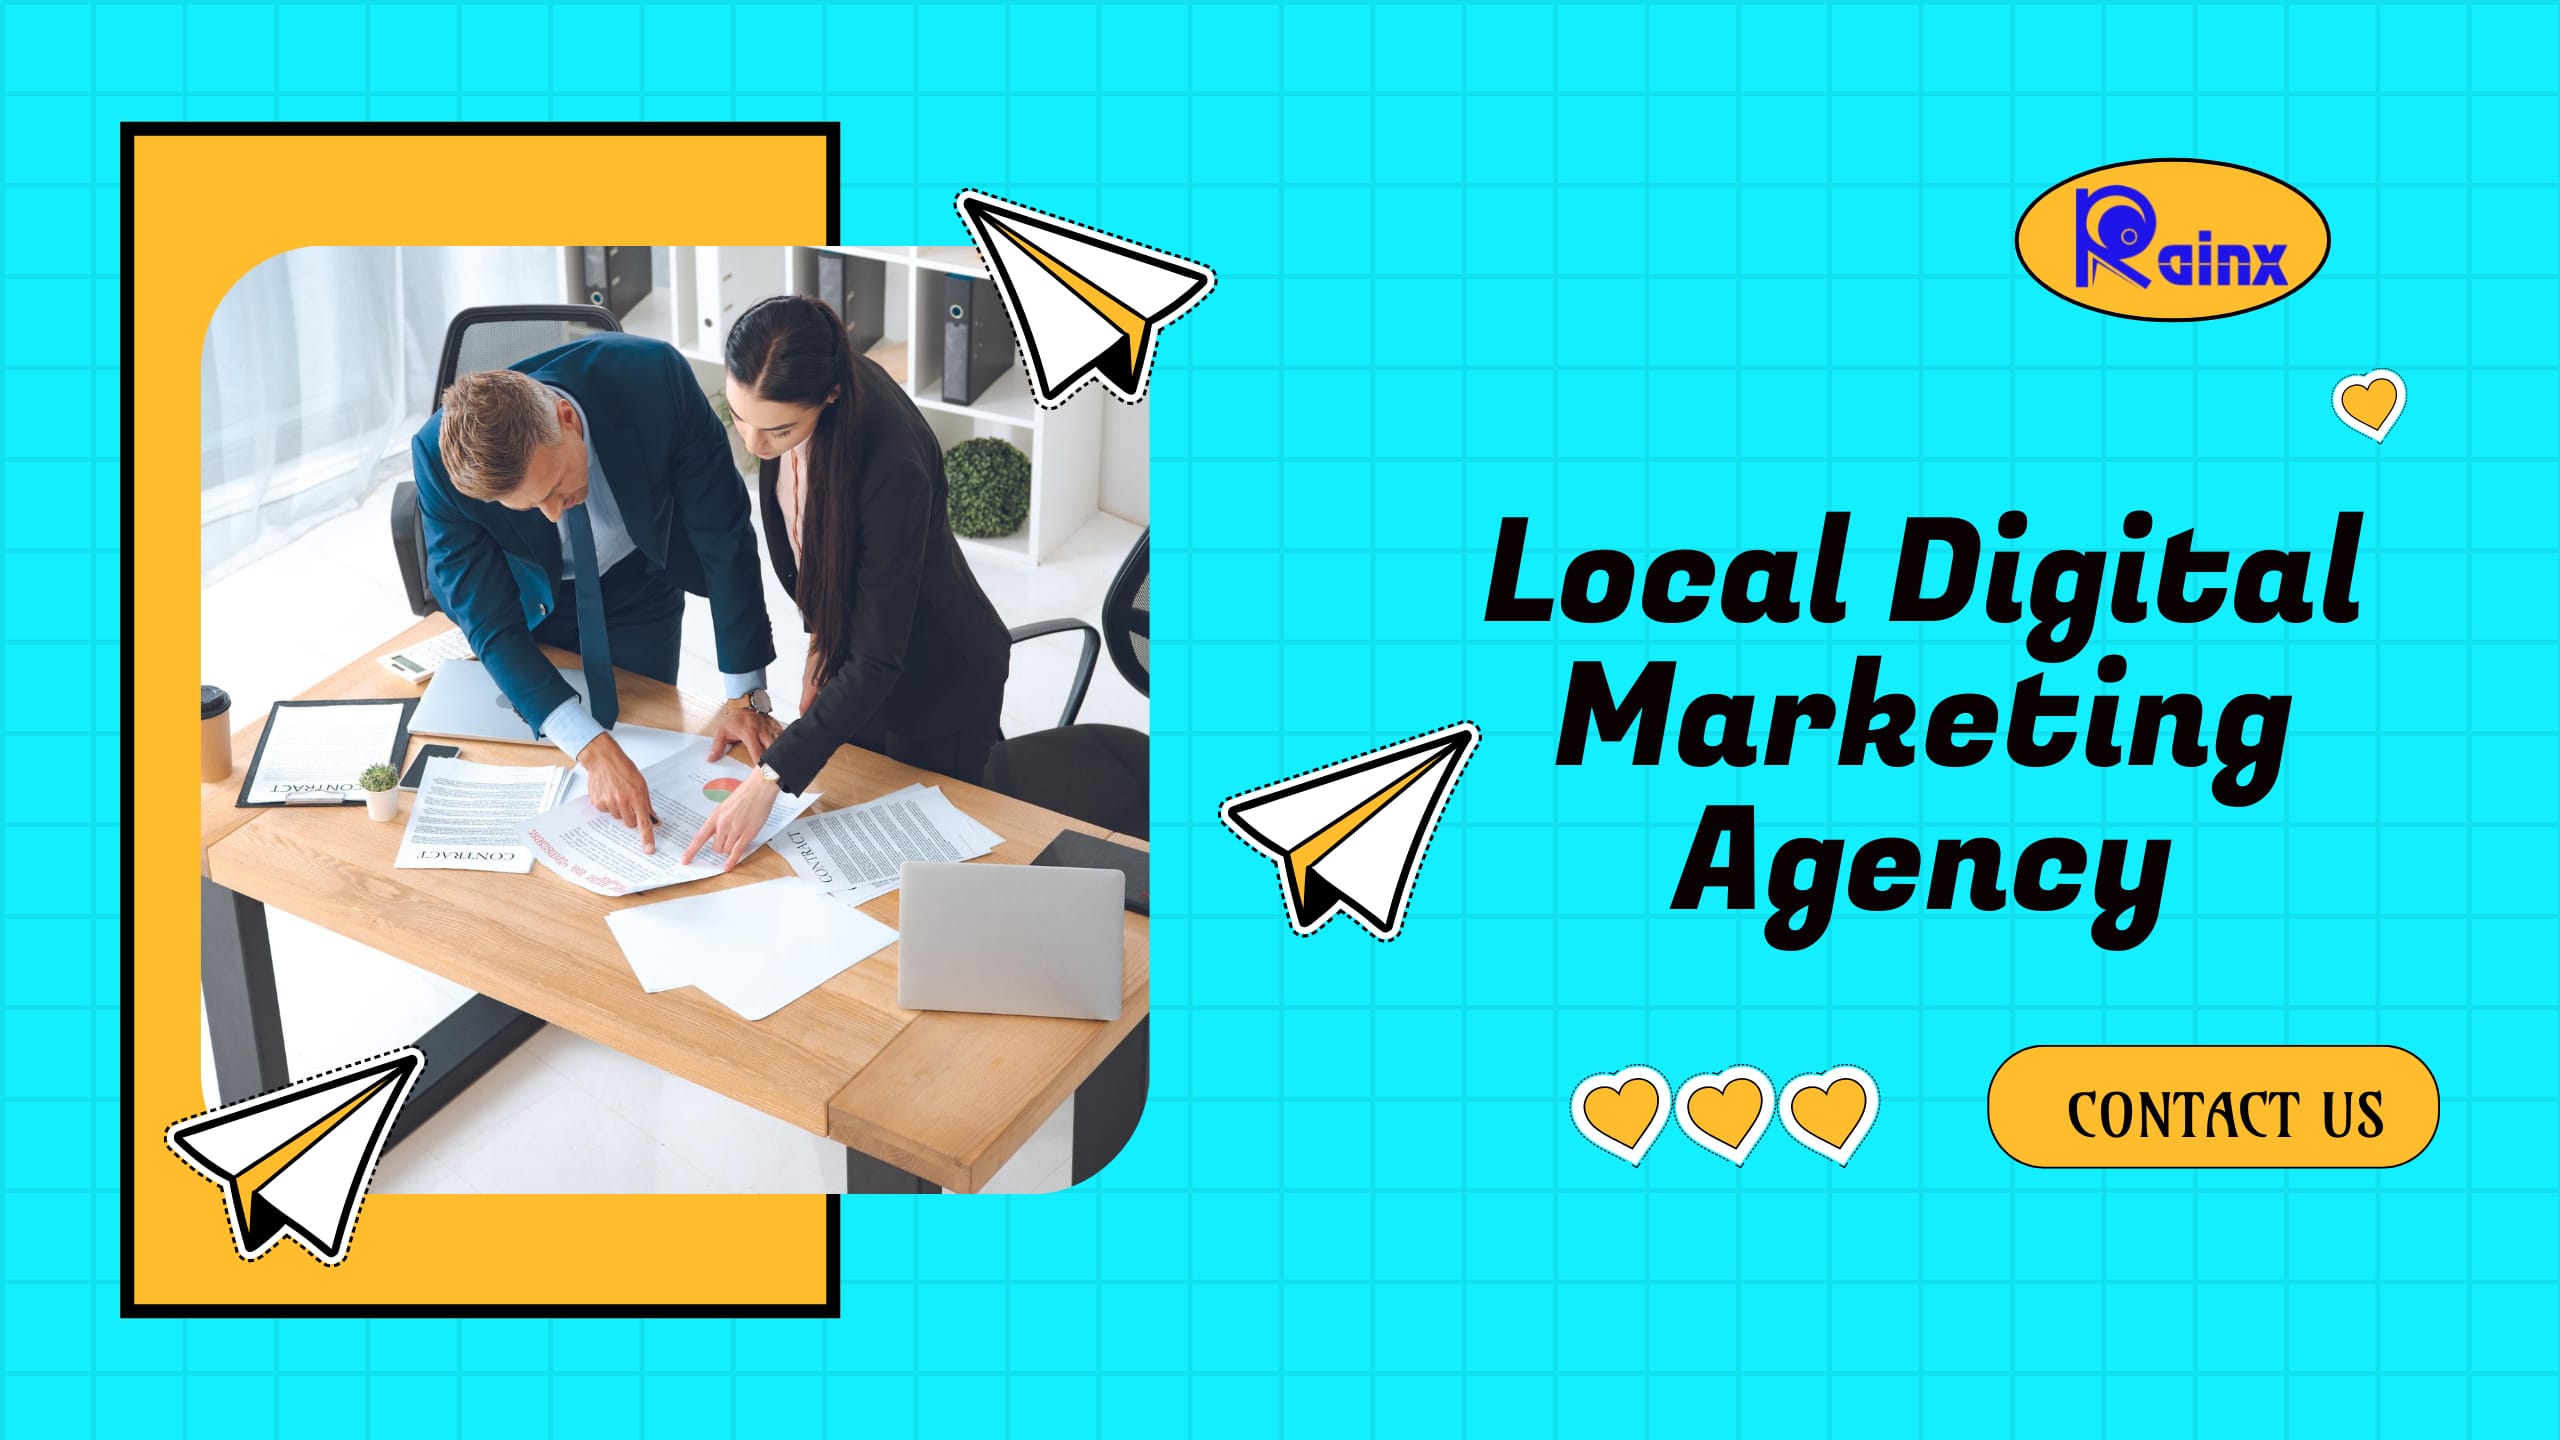 Dominate Your Local Market With the Help of a Local Digital Marketing Agency